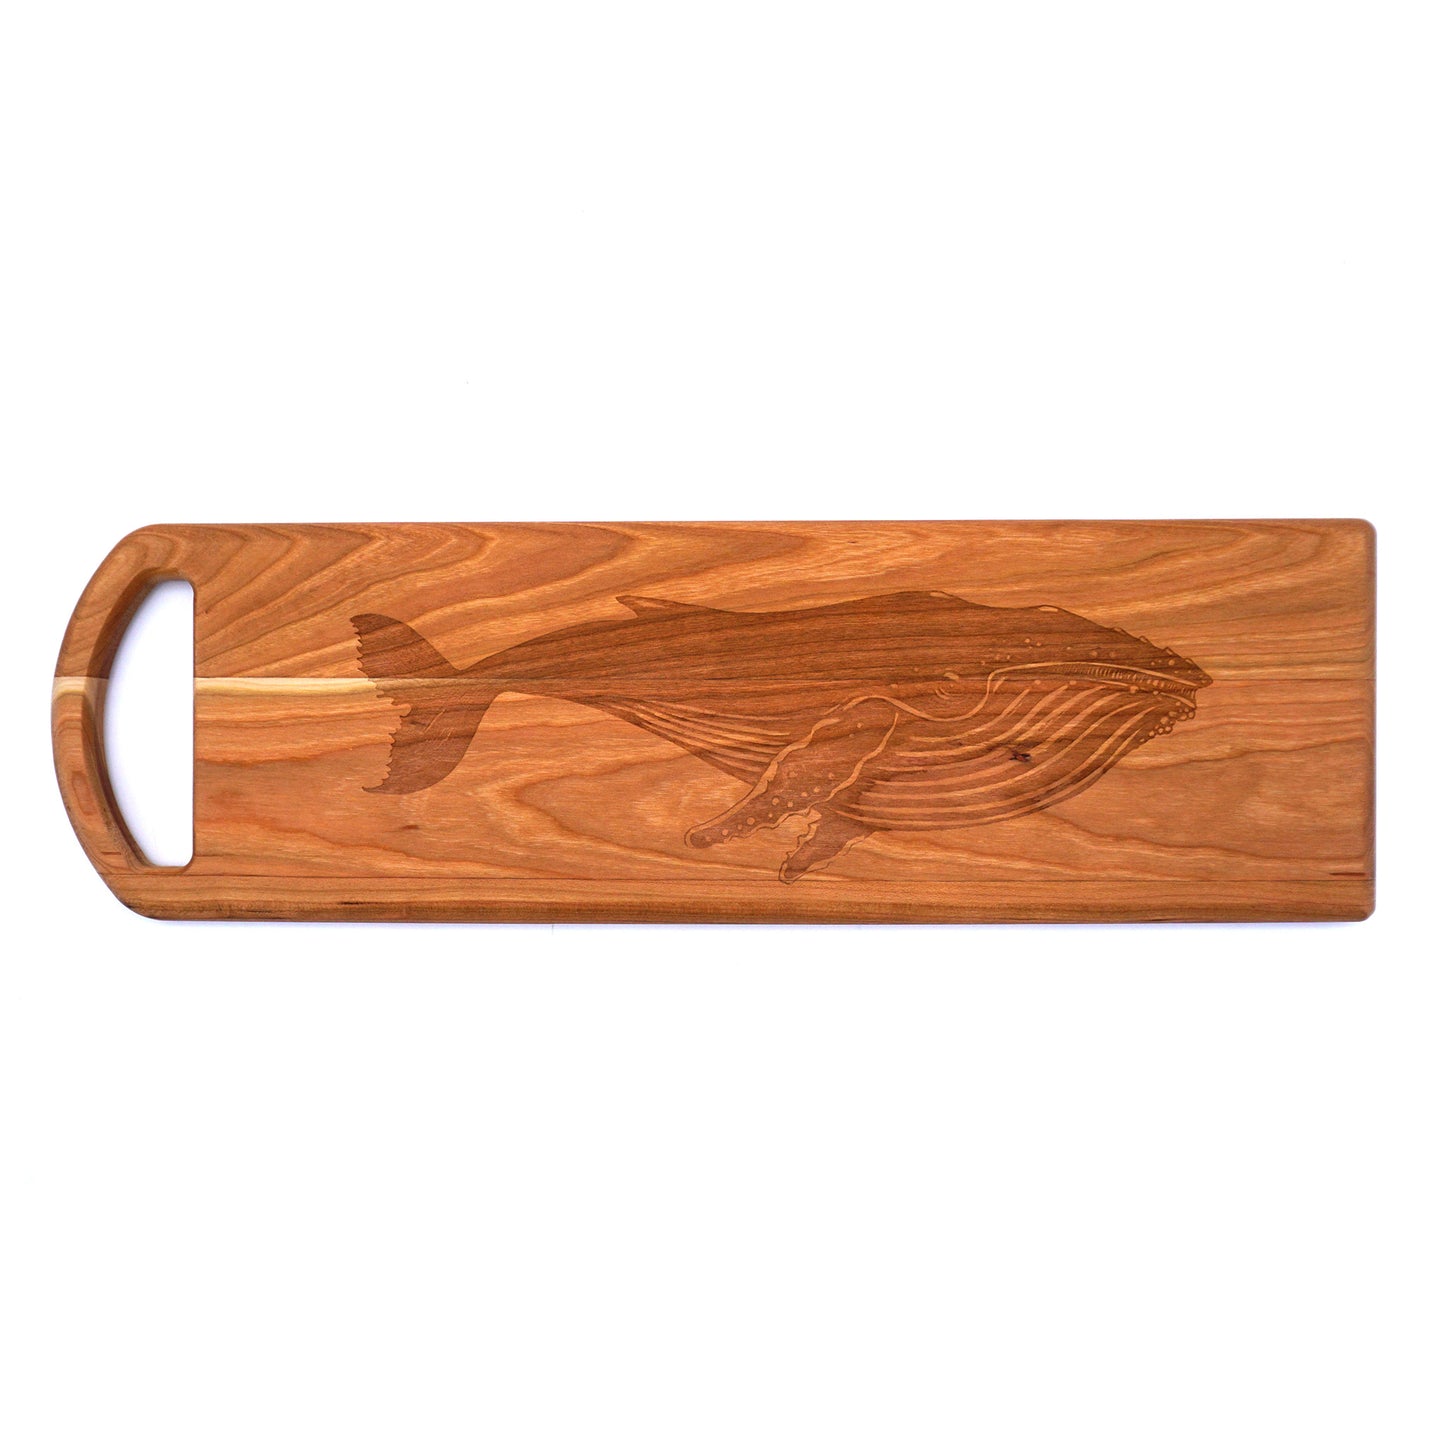 Laura Zindel Cherry Bread Board - More designs available